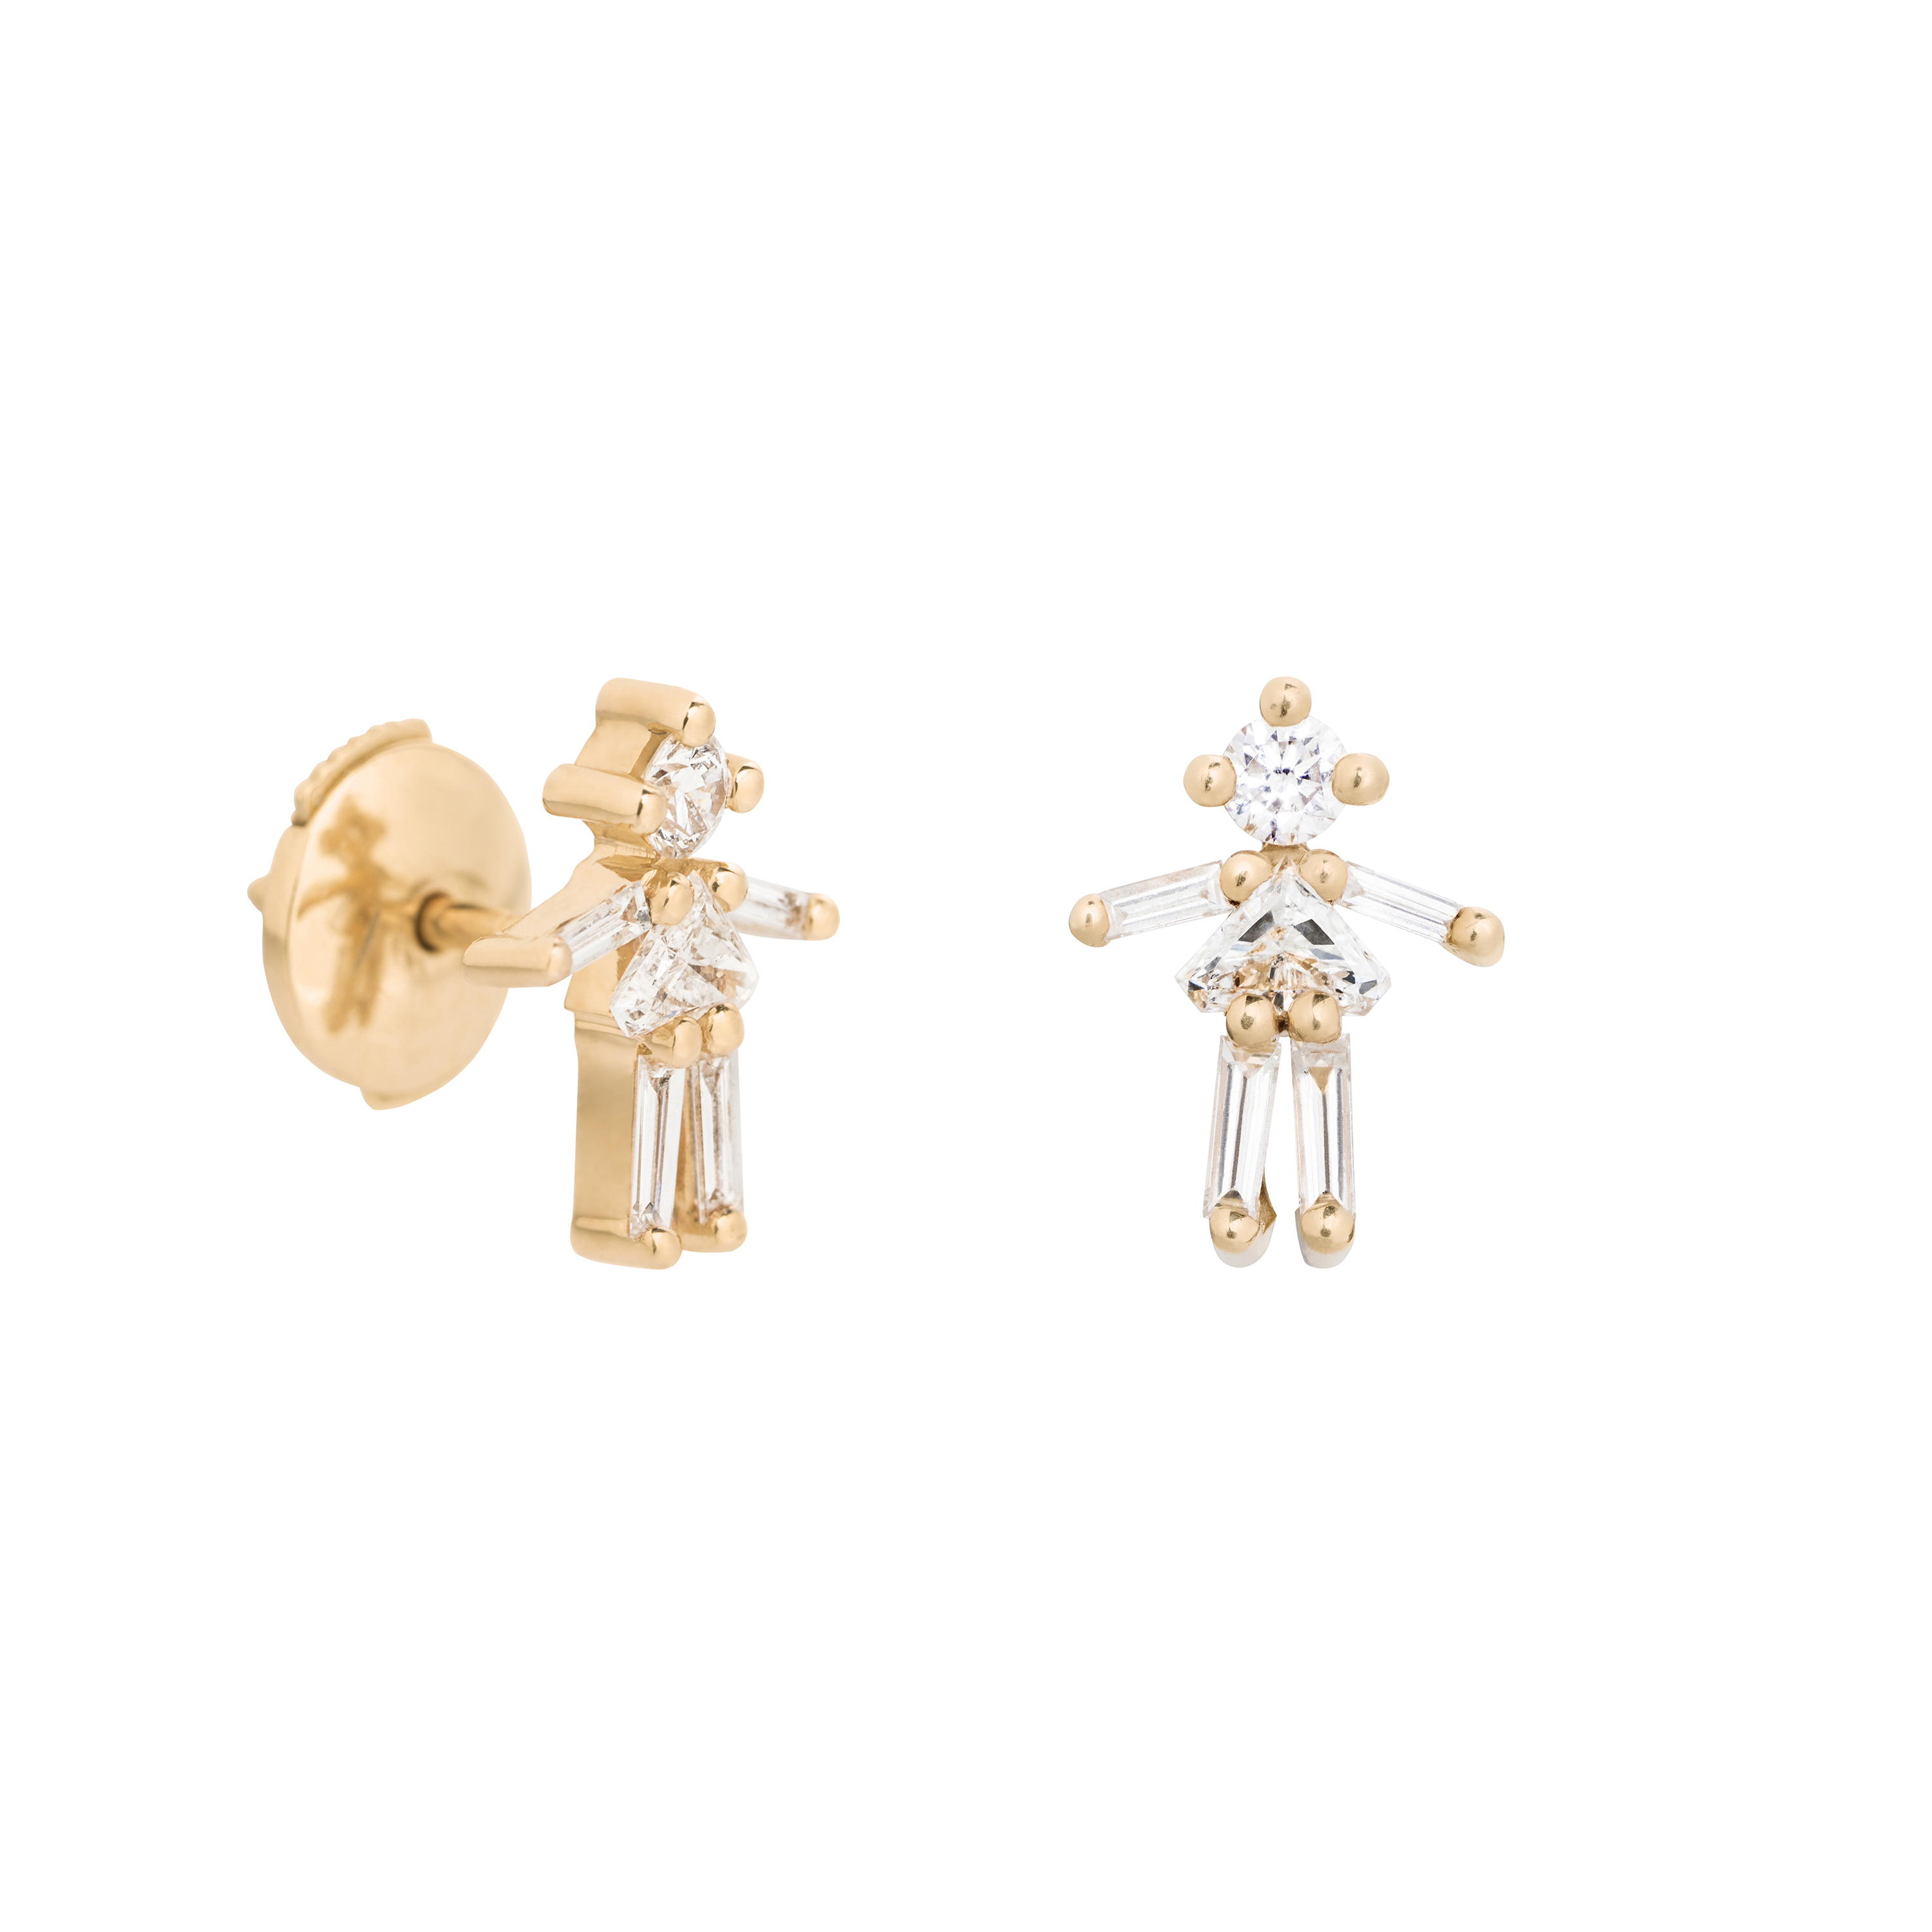 Little Ones Stud earrings mounted on rose gold with diamonds